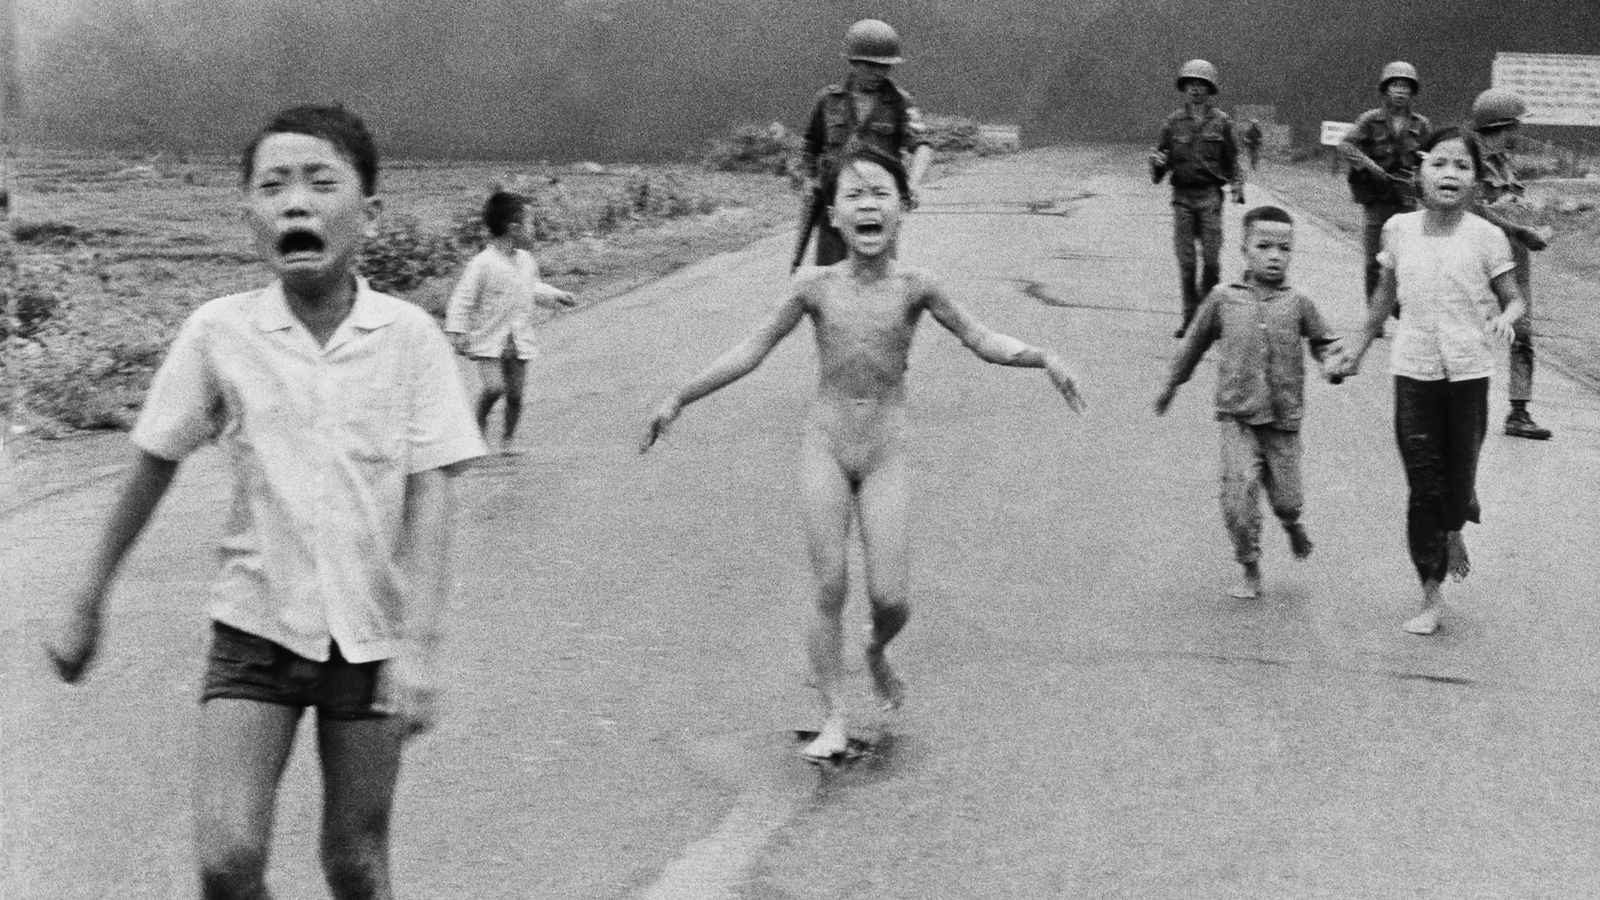 Vietnam 'Napalm Girl' receives final skin treatment in Florida 50 years after iconic image